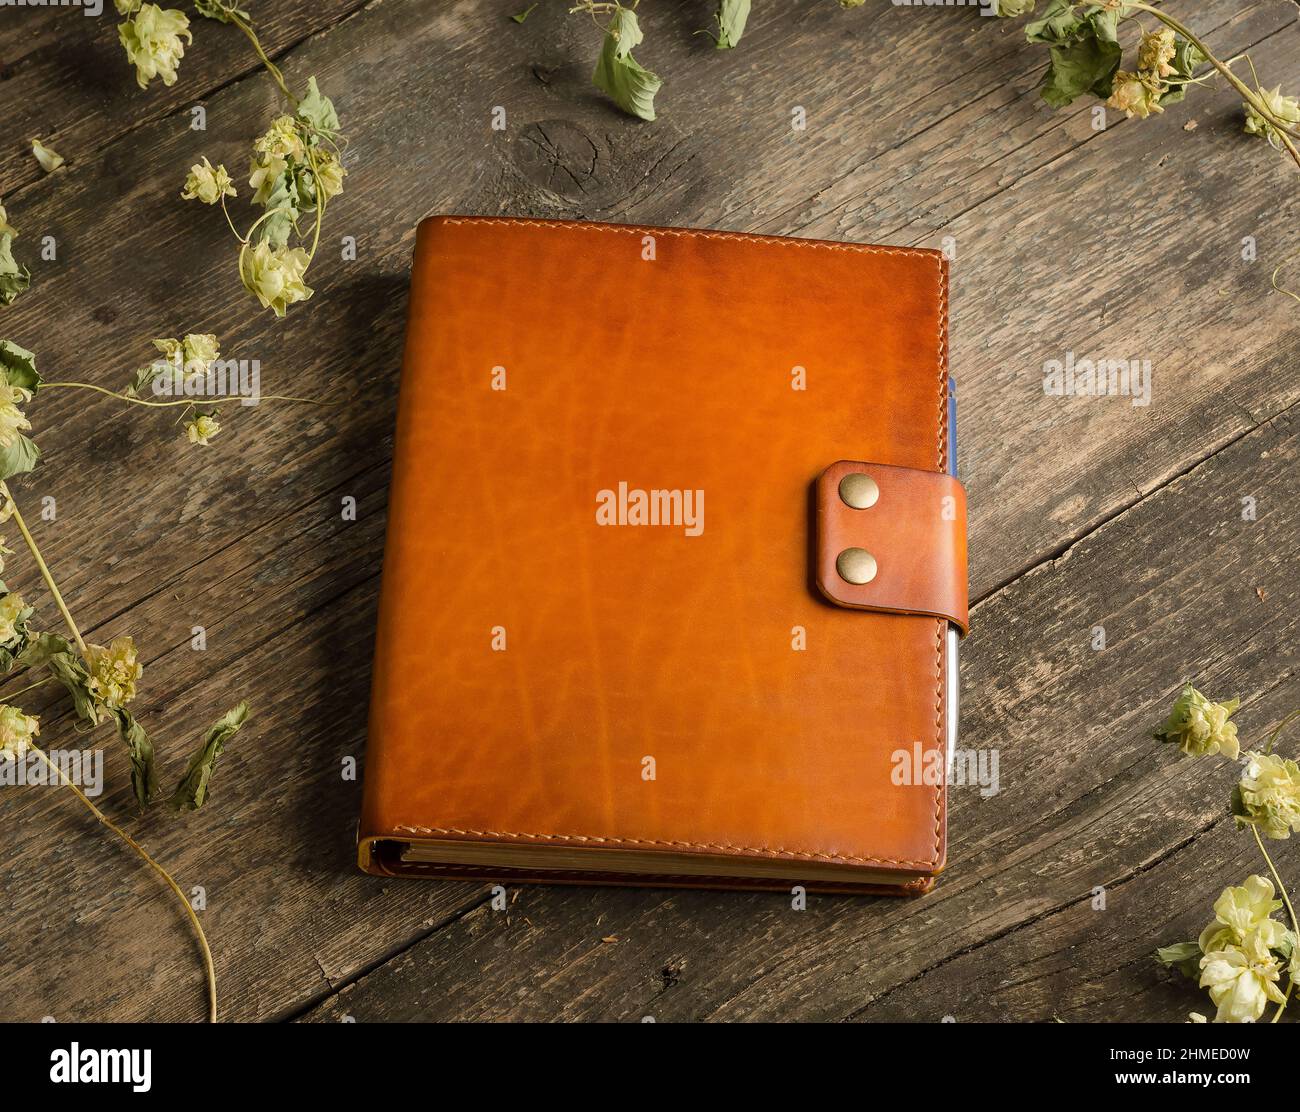 Handmade leather men's wallet in brown-orange color on an old vintage wooden background. Stock Photo